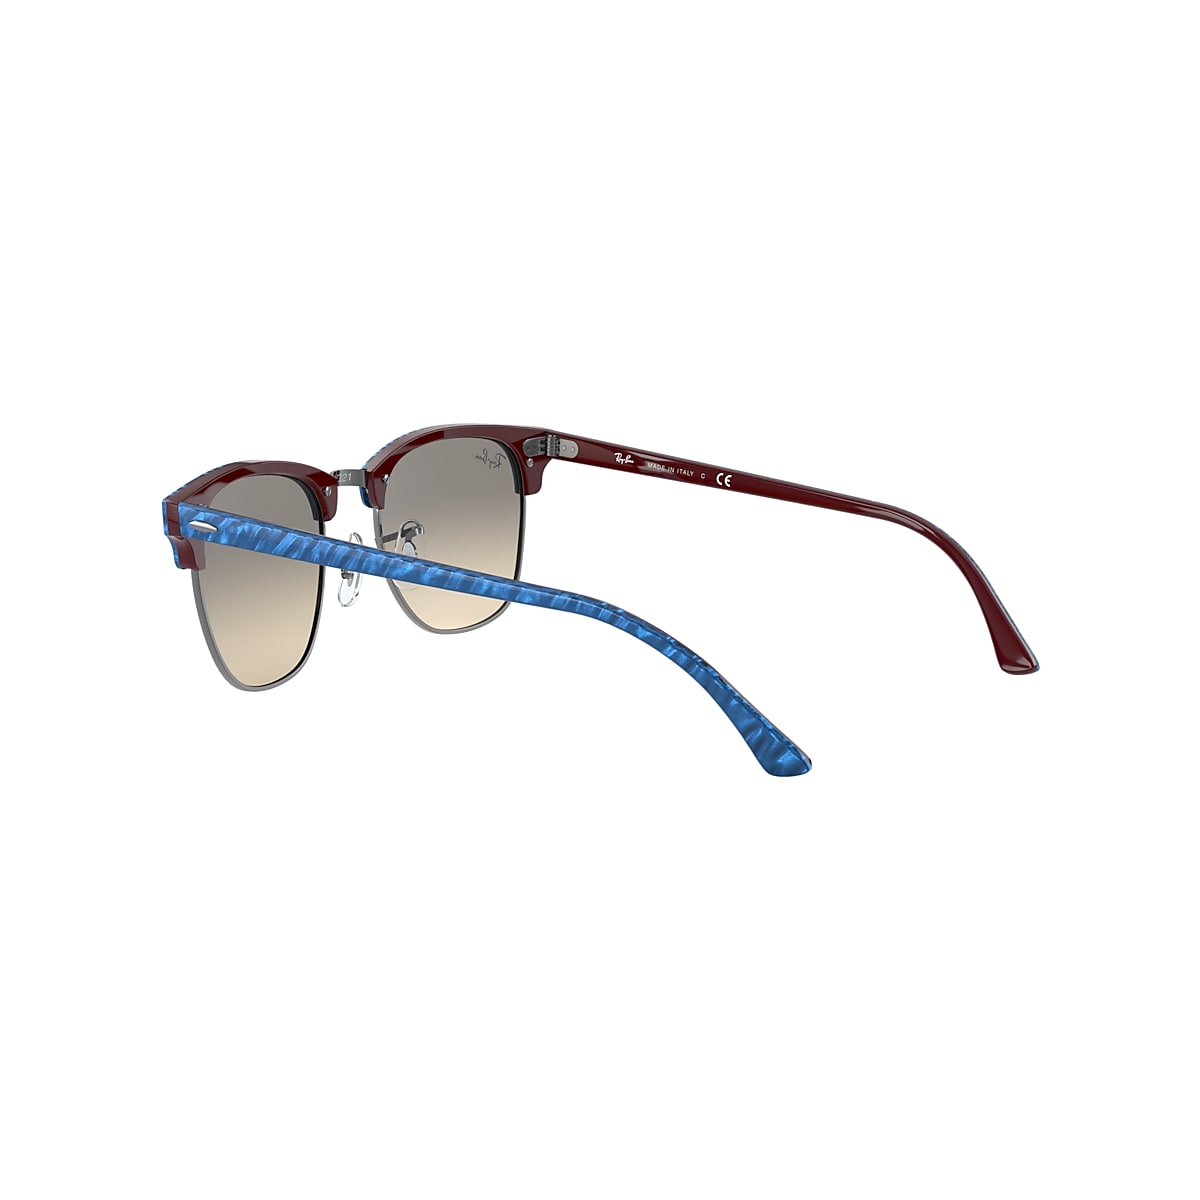 Ray-Ban, Accessories, Ray Ban Blue Marble Clubmaster Sunglasses